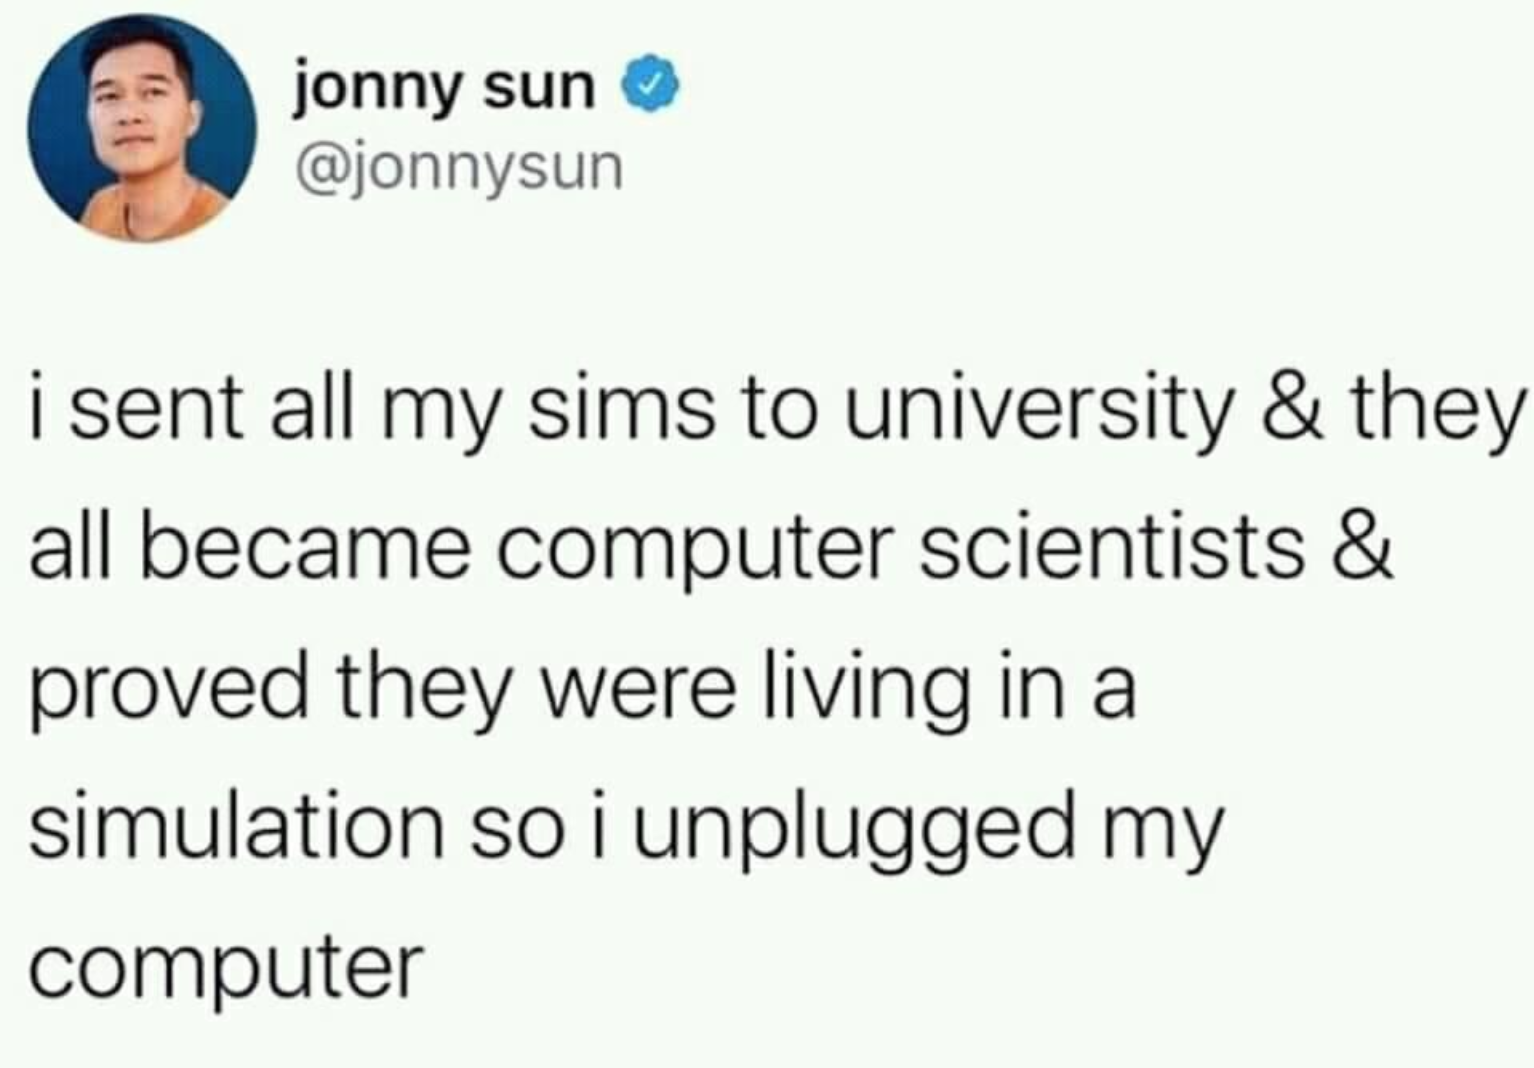 funny gaming memes - jonny sun i sent all my sims to university & they all became computer scientists & proved they were living in a simulation so i unplugged my computer